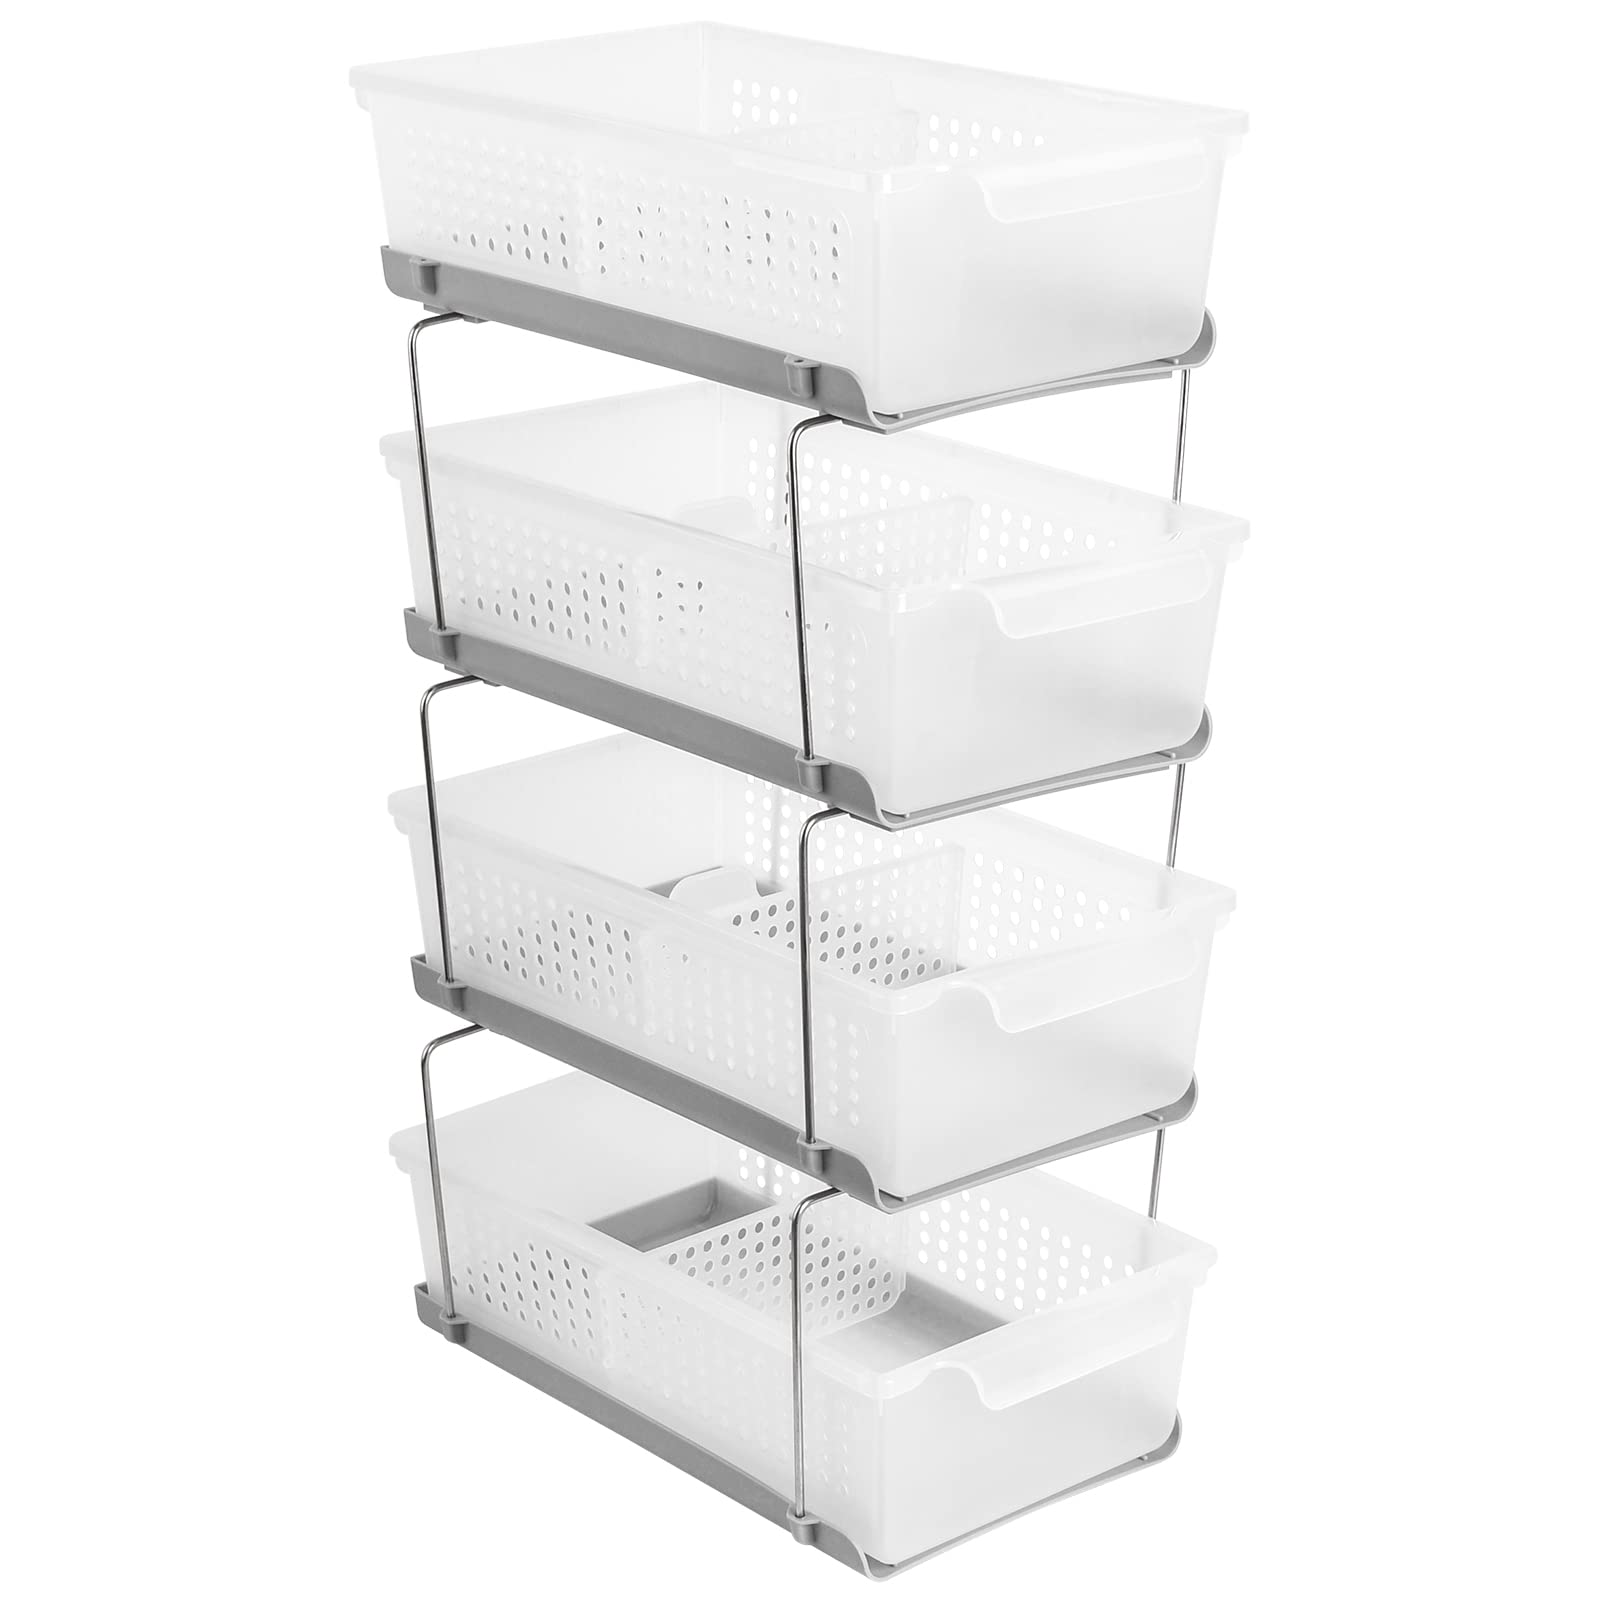 JRing 4-Tier Under Sink Organizer, Kitchen/Bathroom Cabinet Organizer Removable Storage Baskets with Dividers Multi-purpose Pull Out Home Organizers